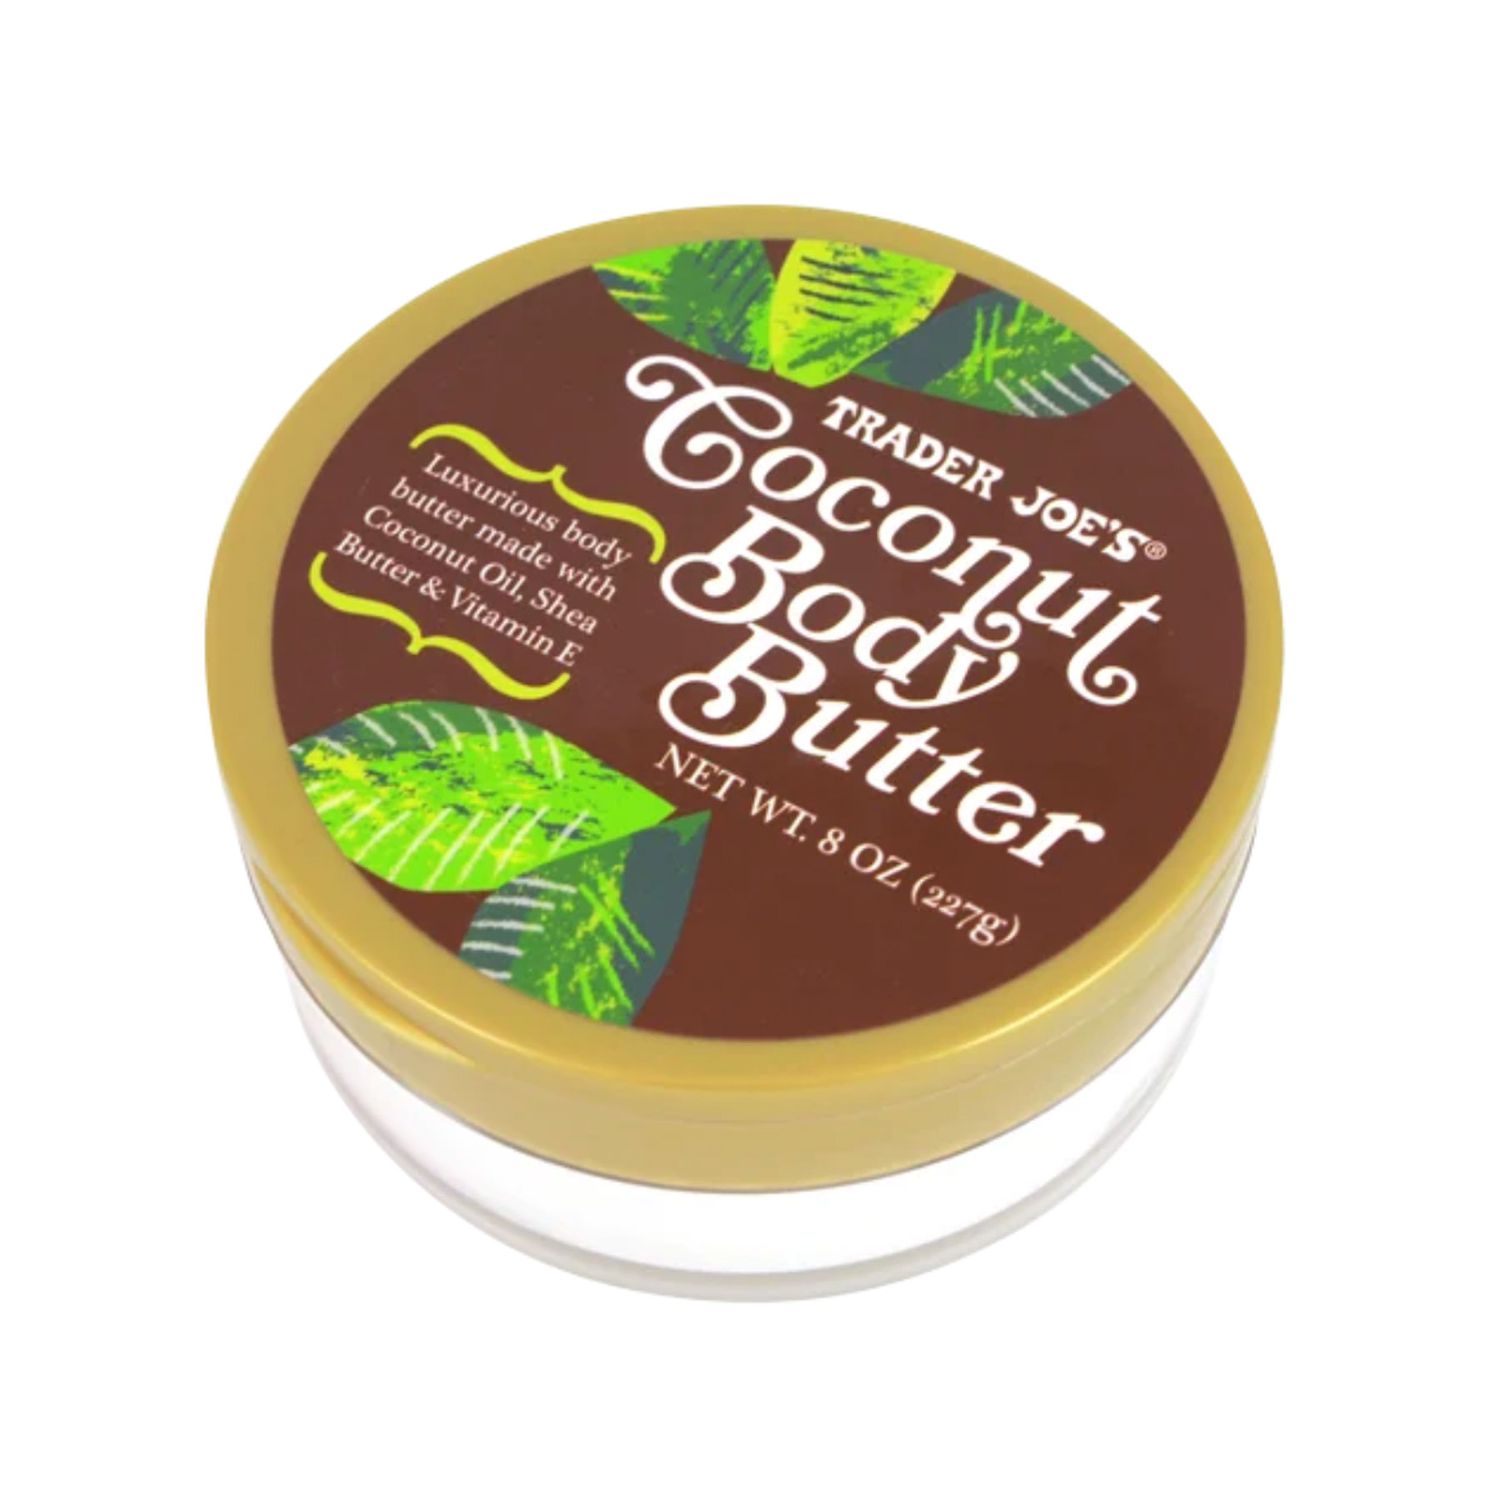 Trader Joe's Gifts coconut body butter